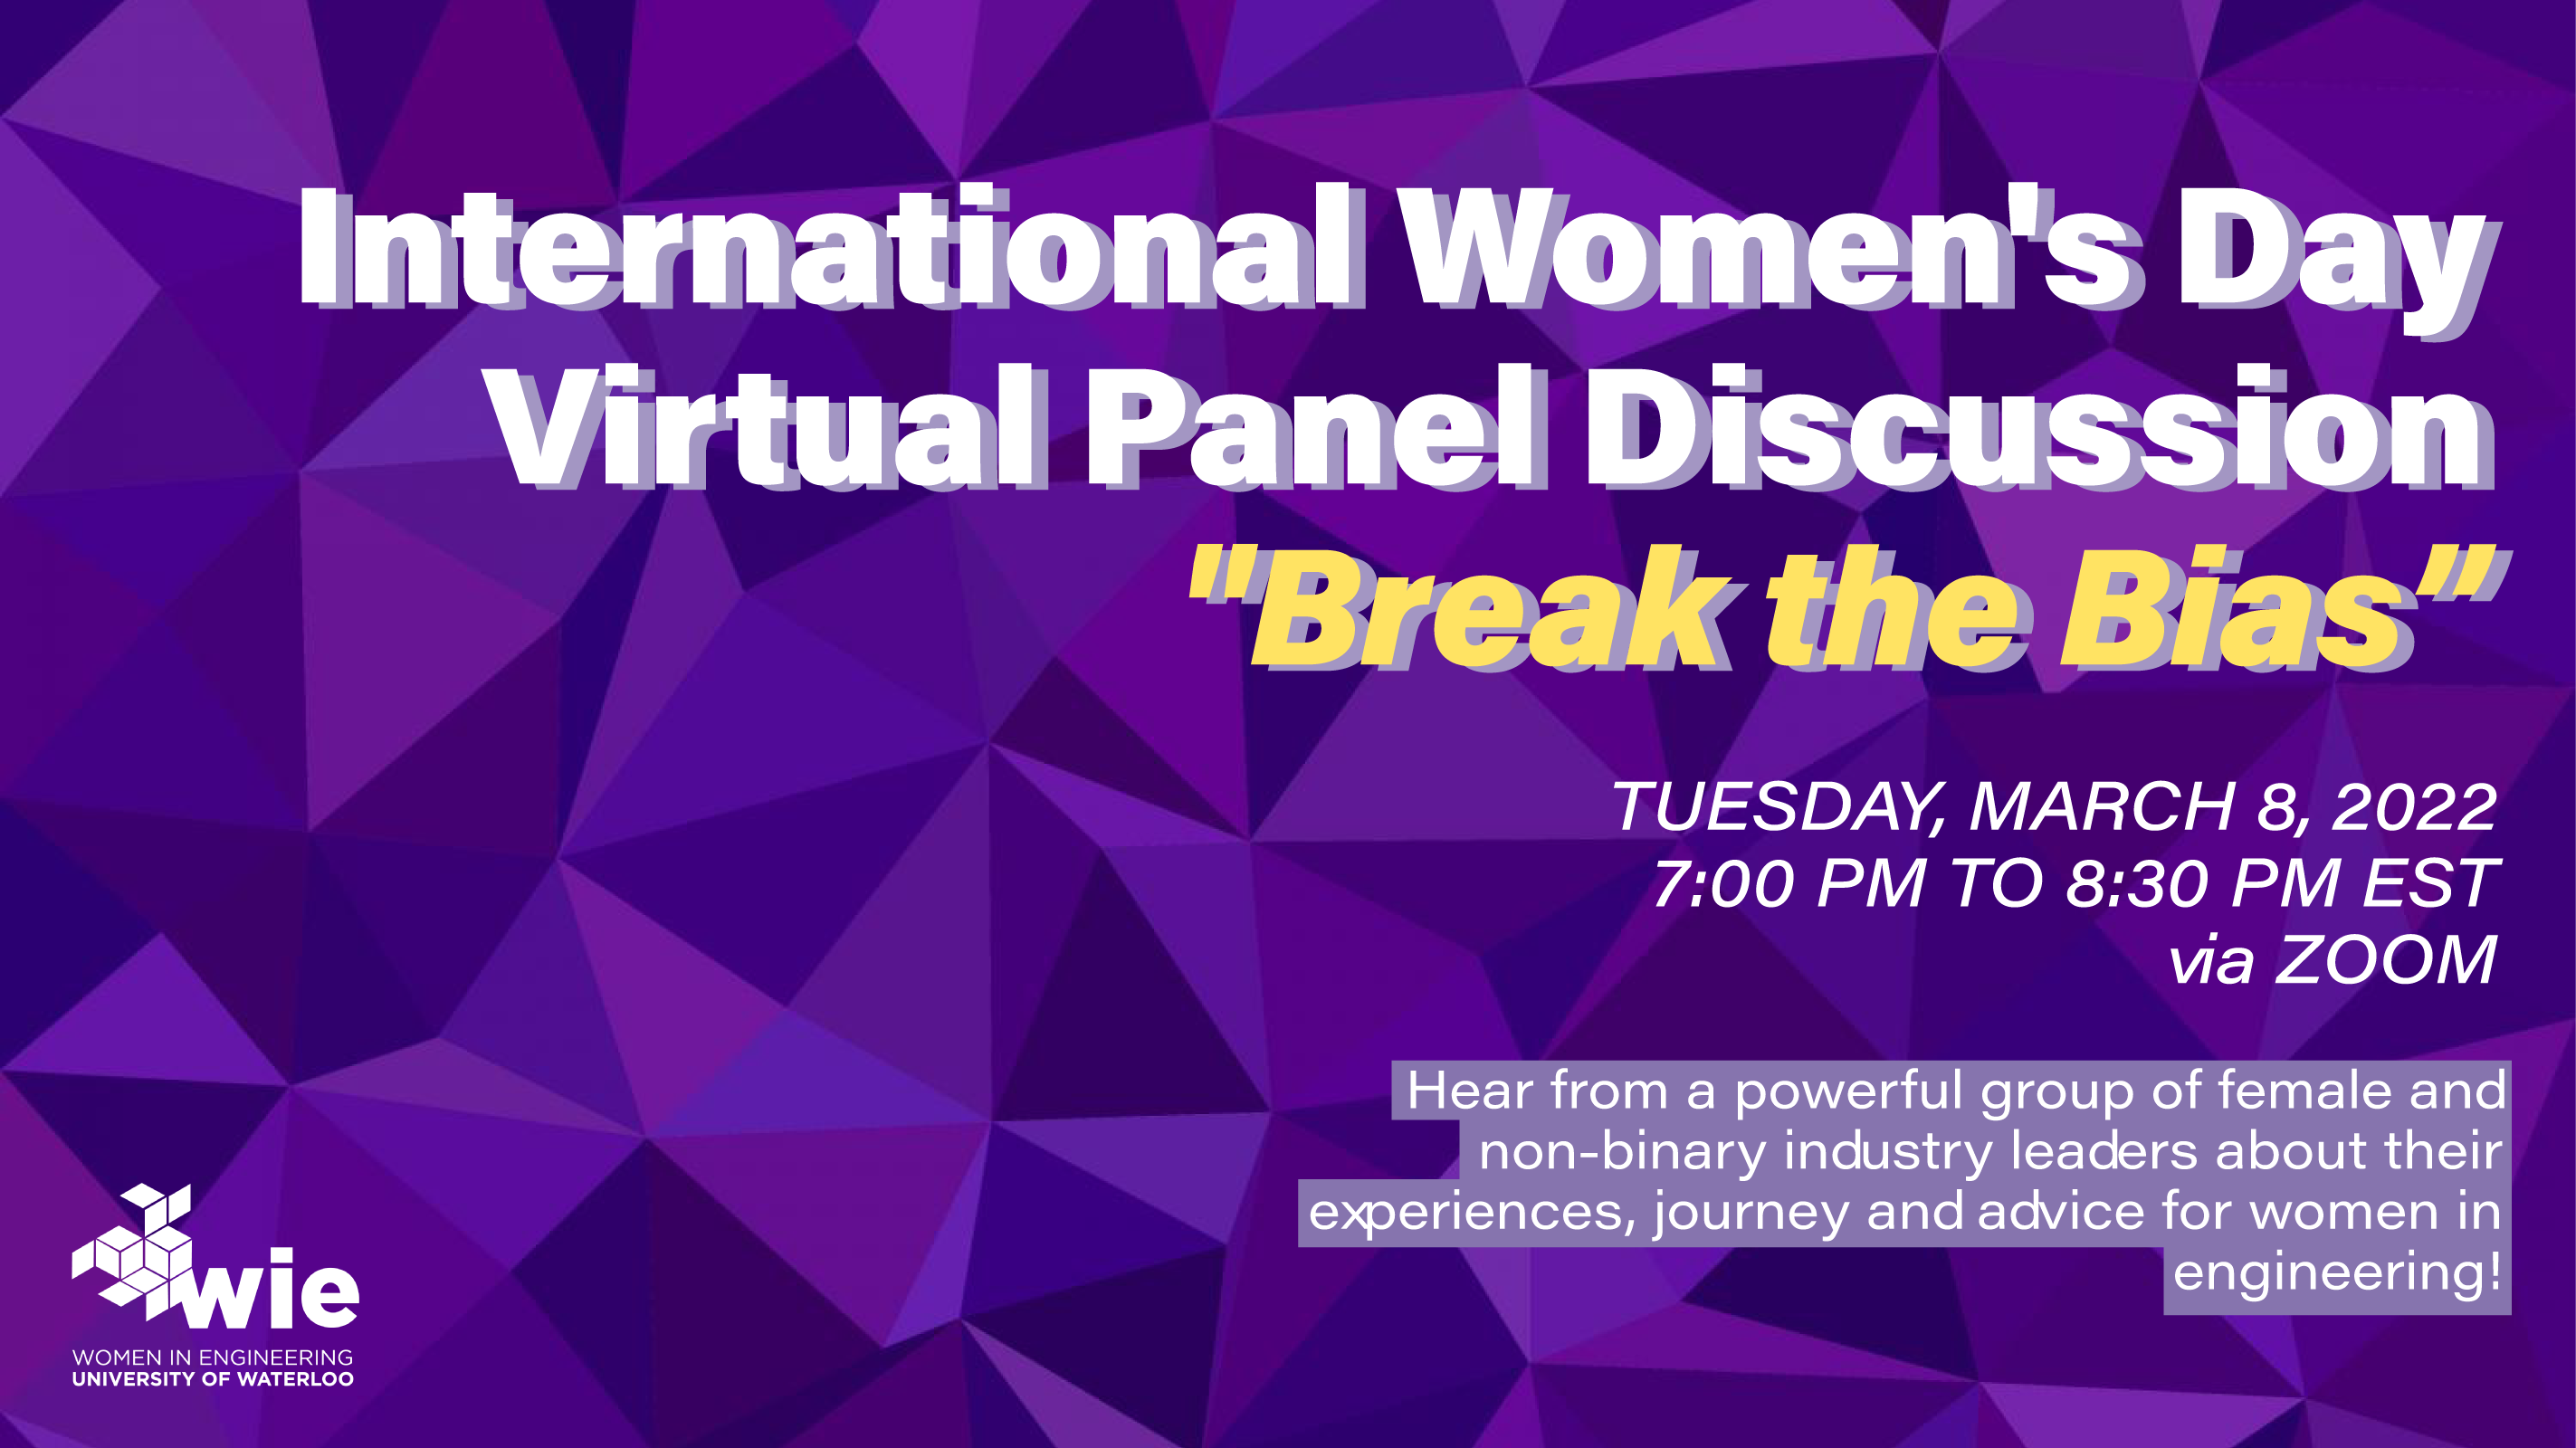 poster with information regarding International Women's Day panel discussion on March 8th from 7:00-8:30 PM via Zoom